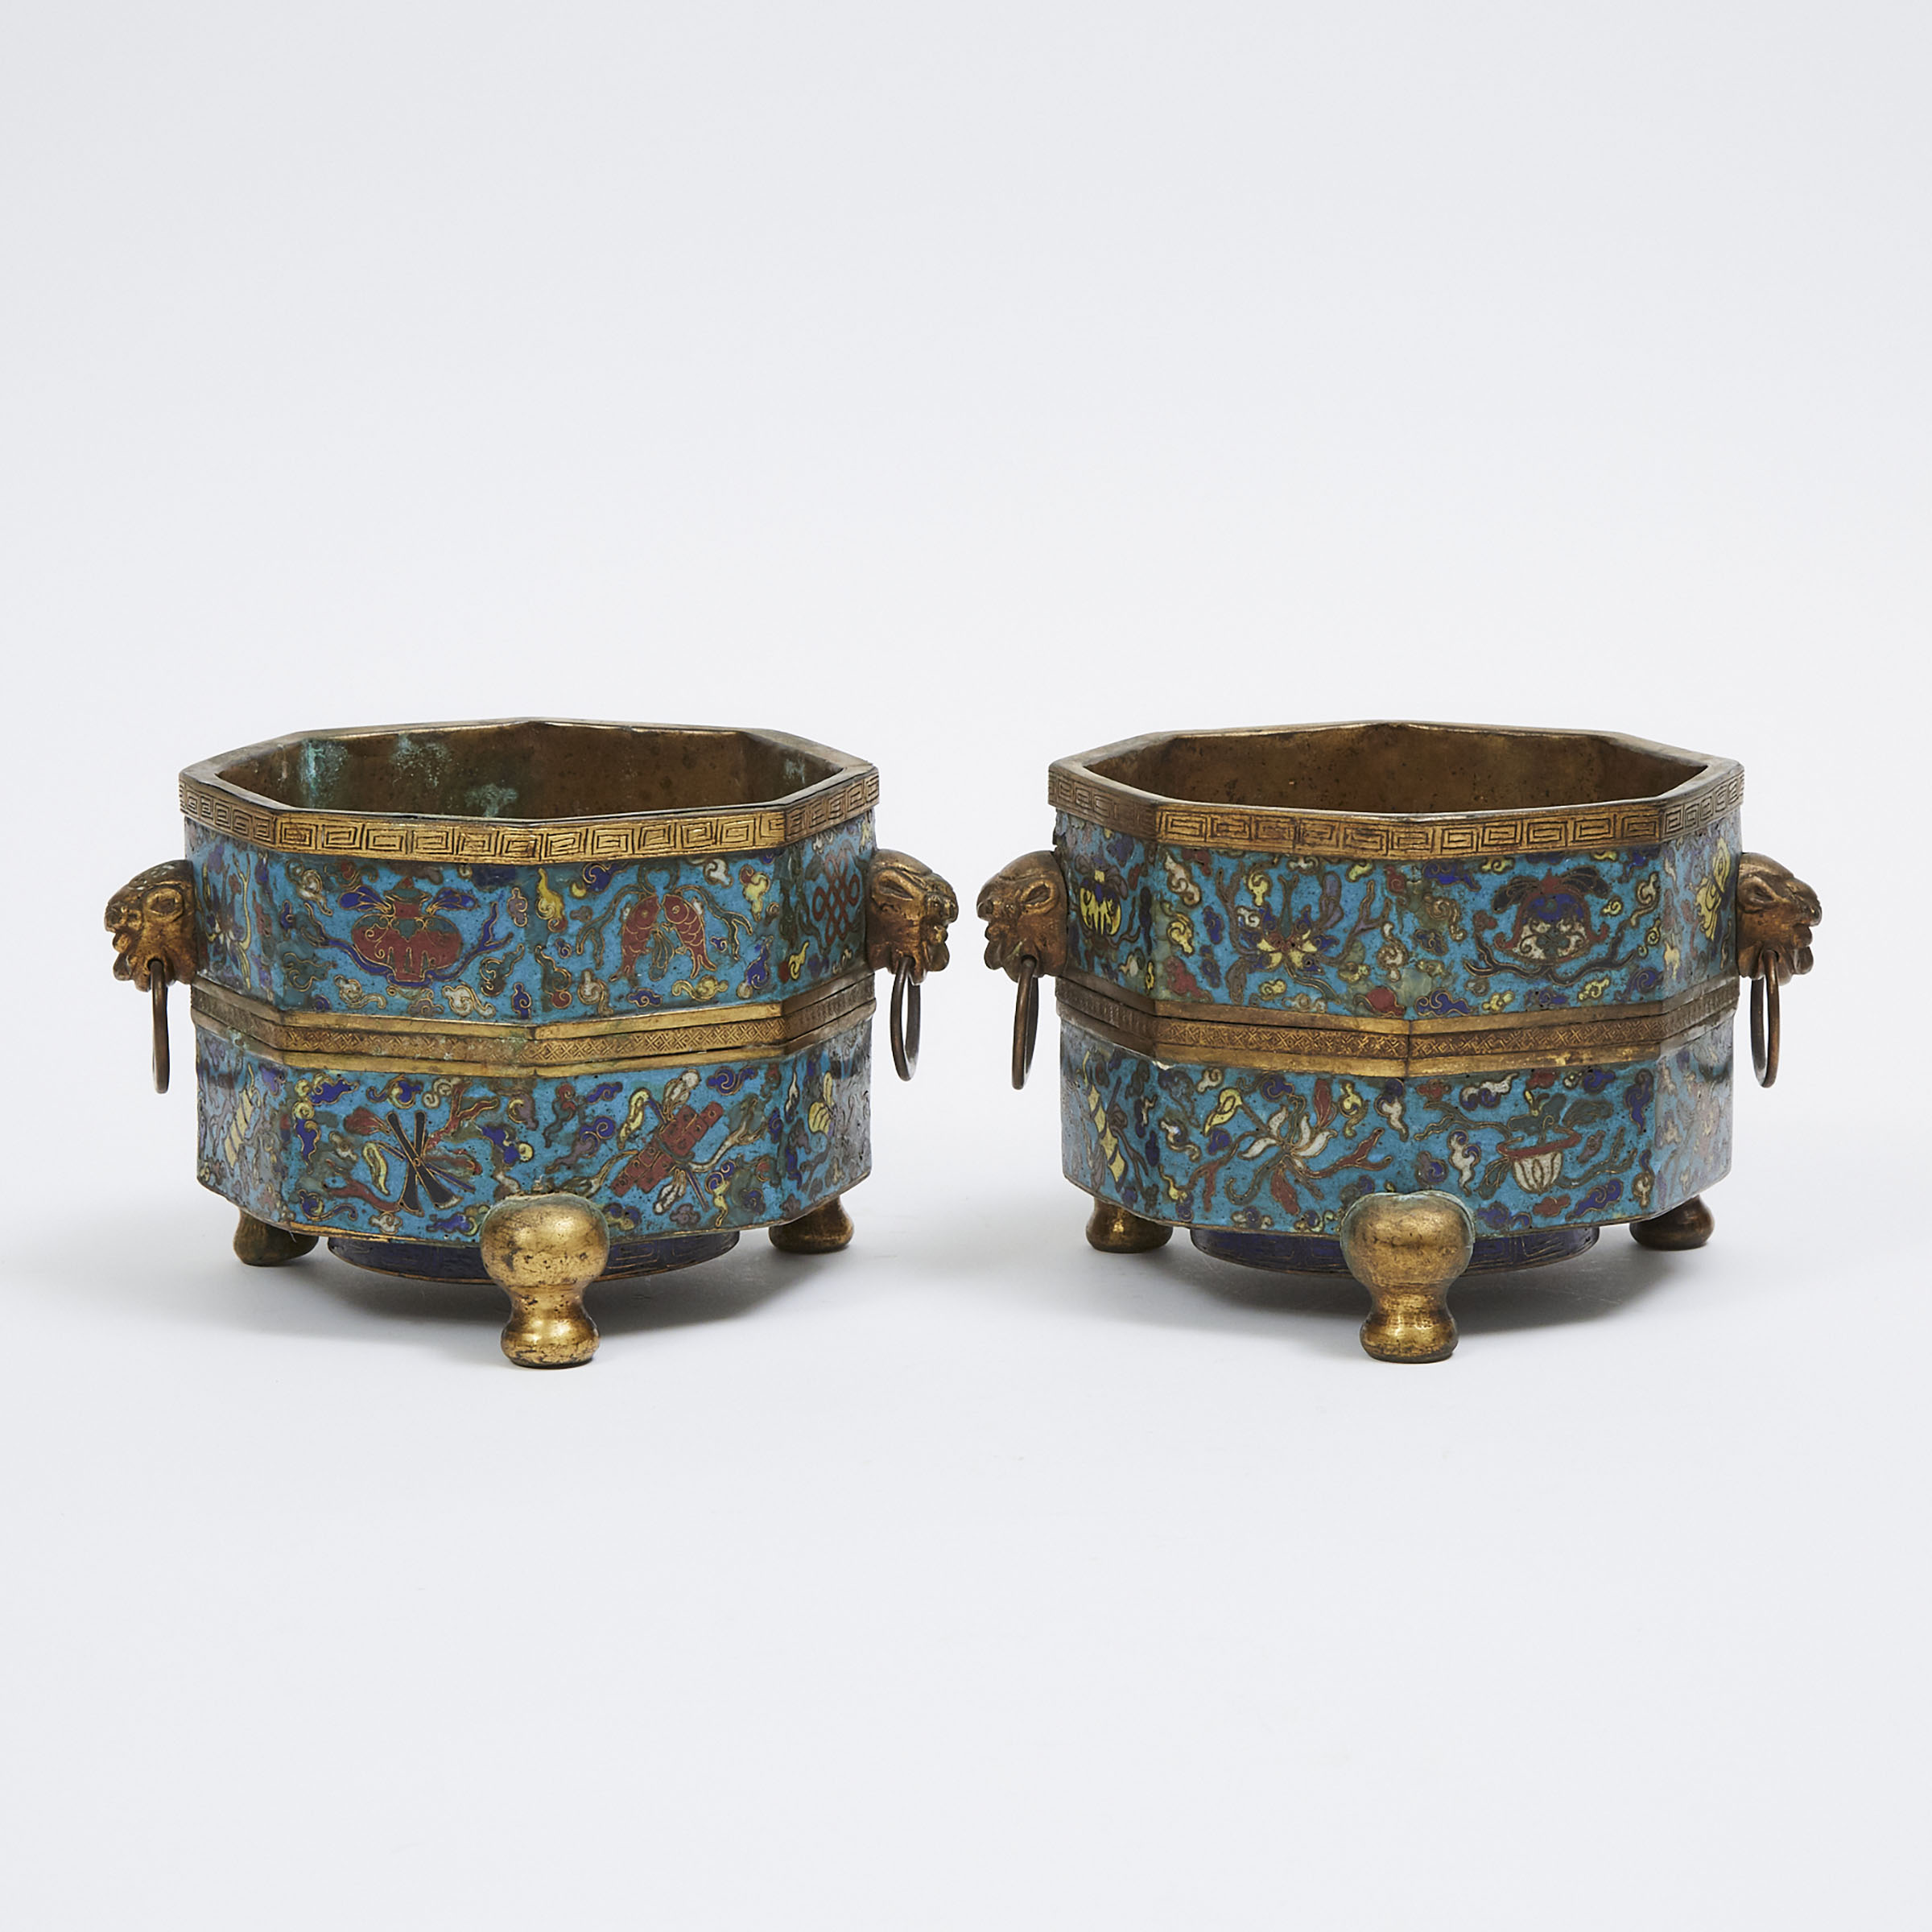 A Pair of Cloisonné 'Eight Buddhist Emblems' Octagonal Vessels, 18th Century, Qing Dynasty